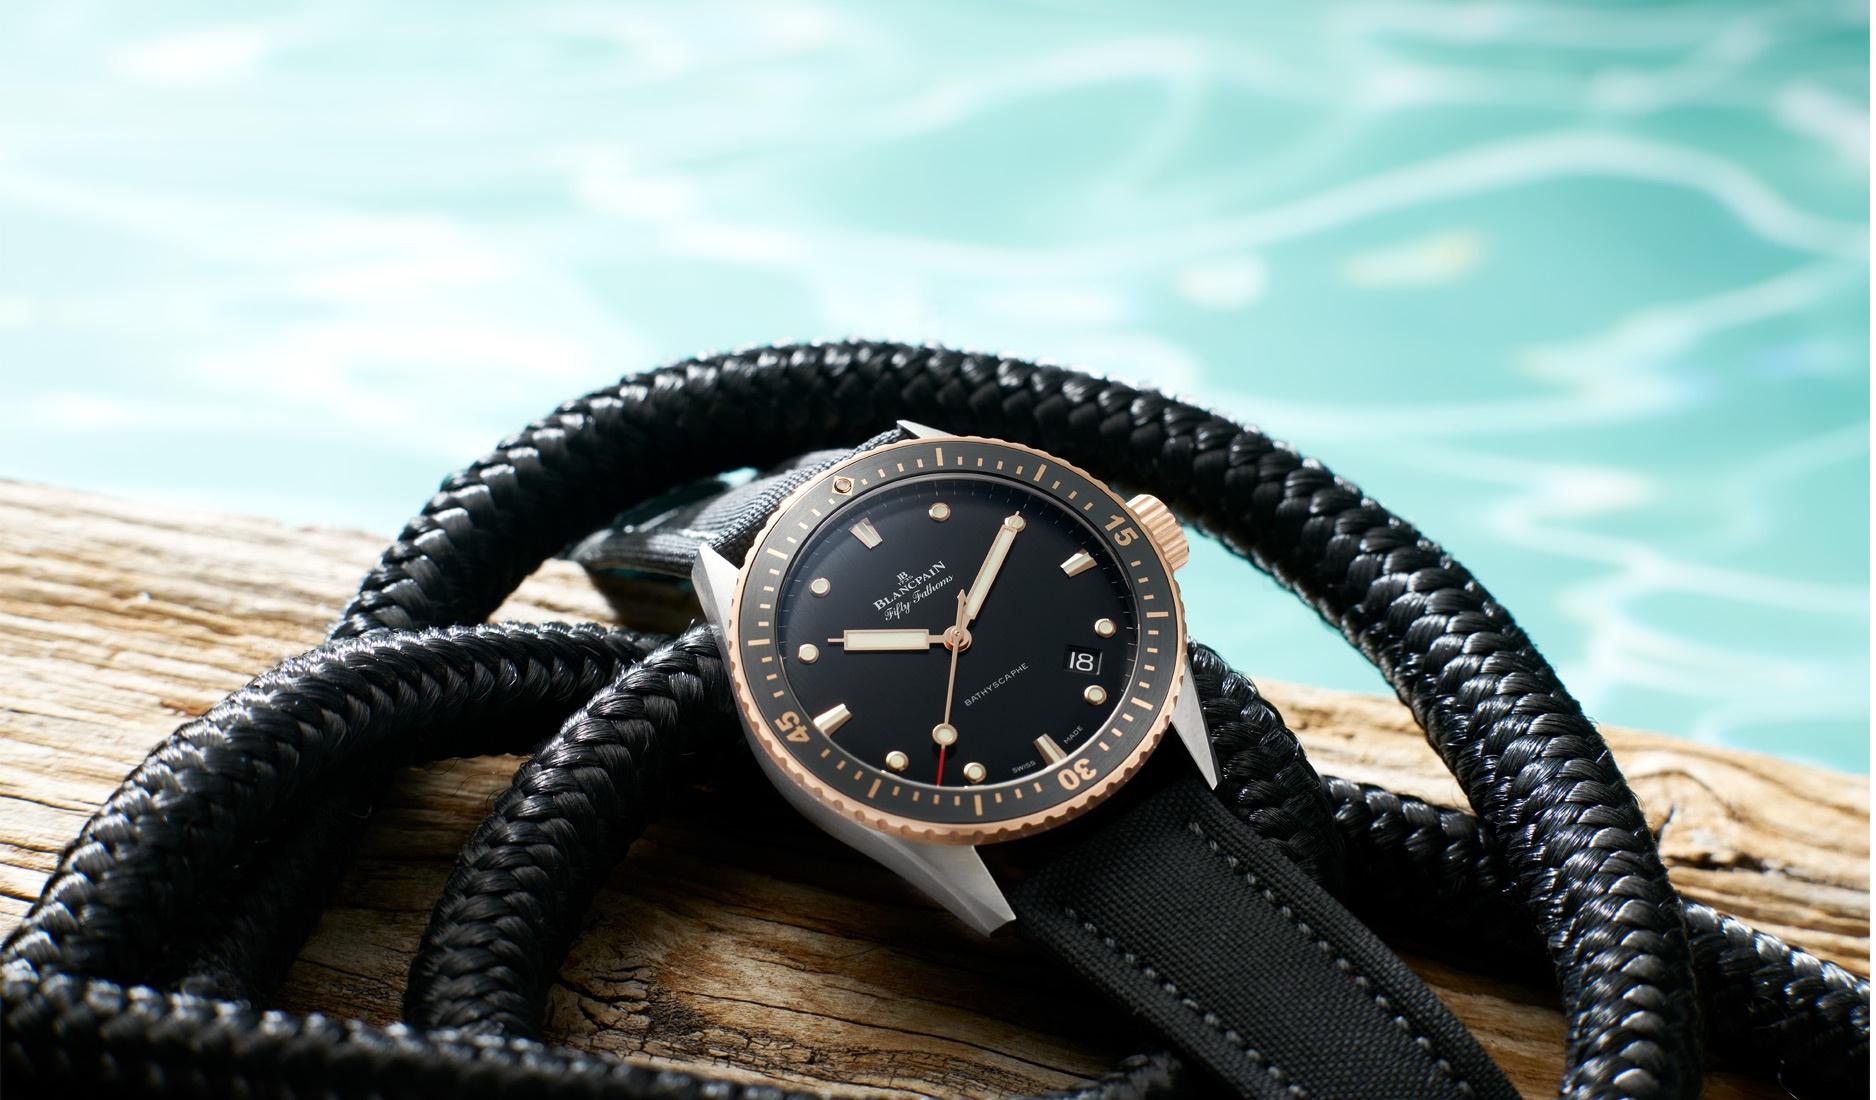 Cortina Watch’s Blancpain Fifty Fathoms Bathyscaphe Limited Edition